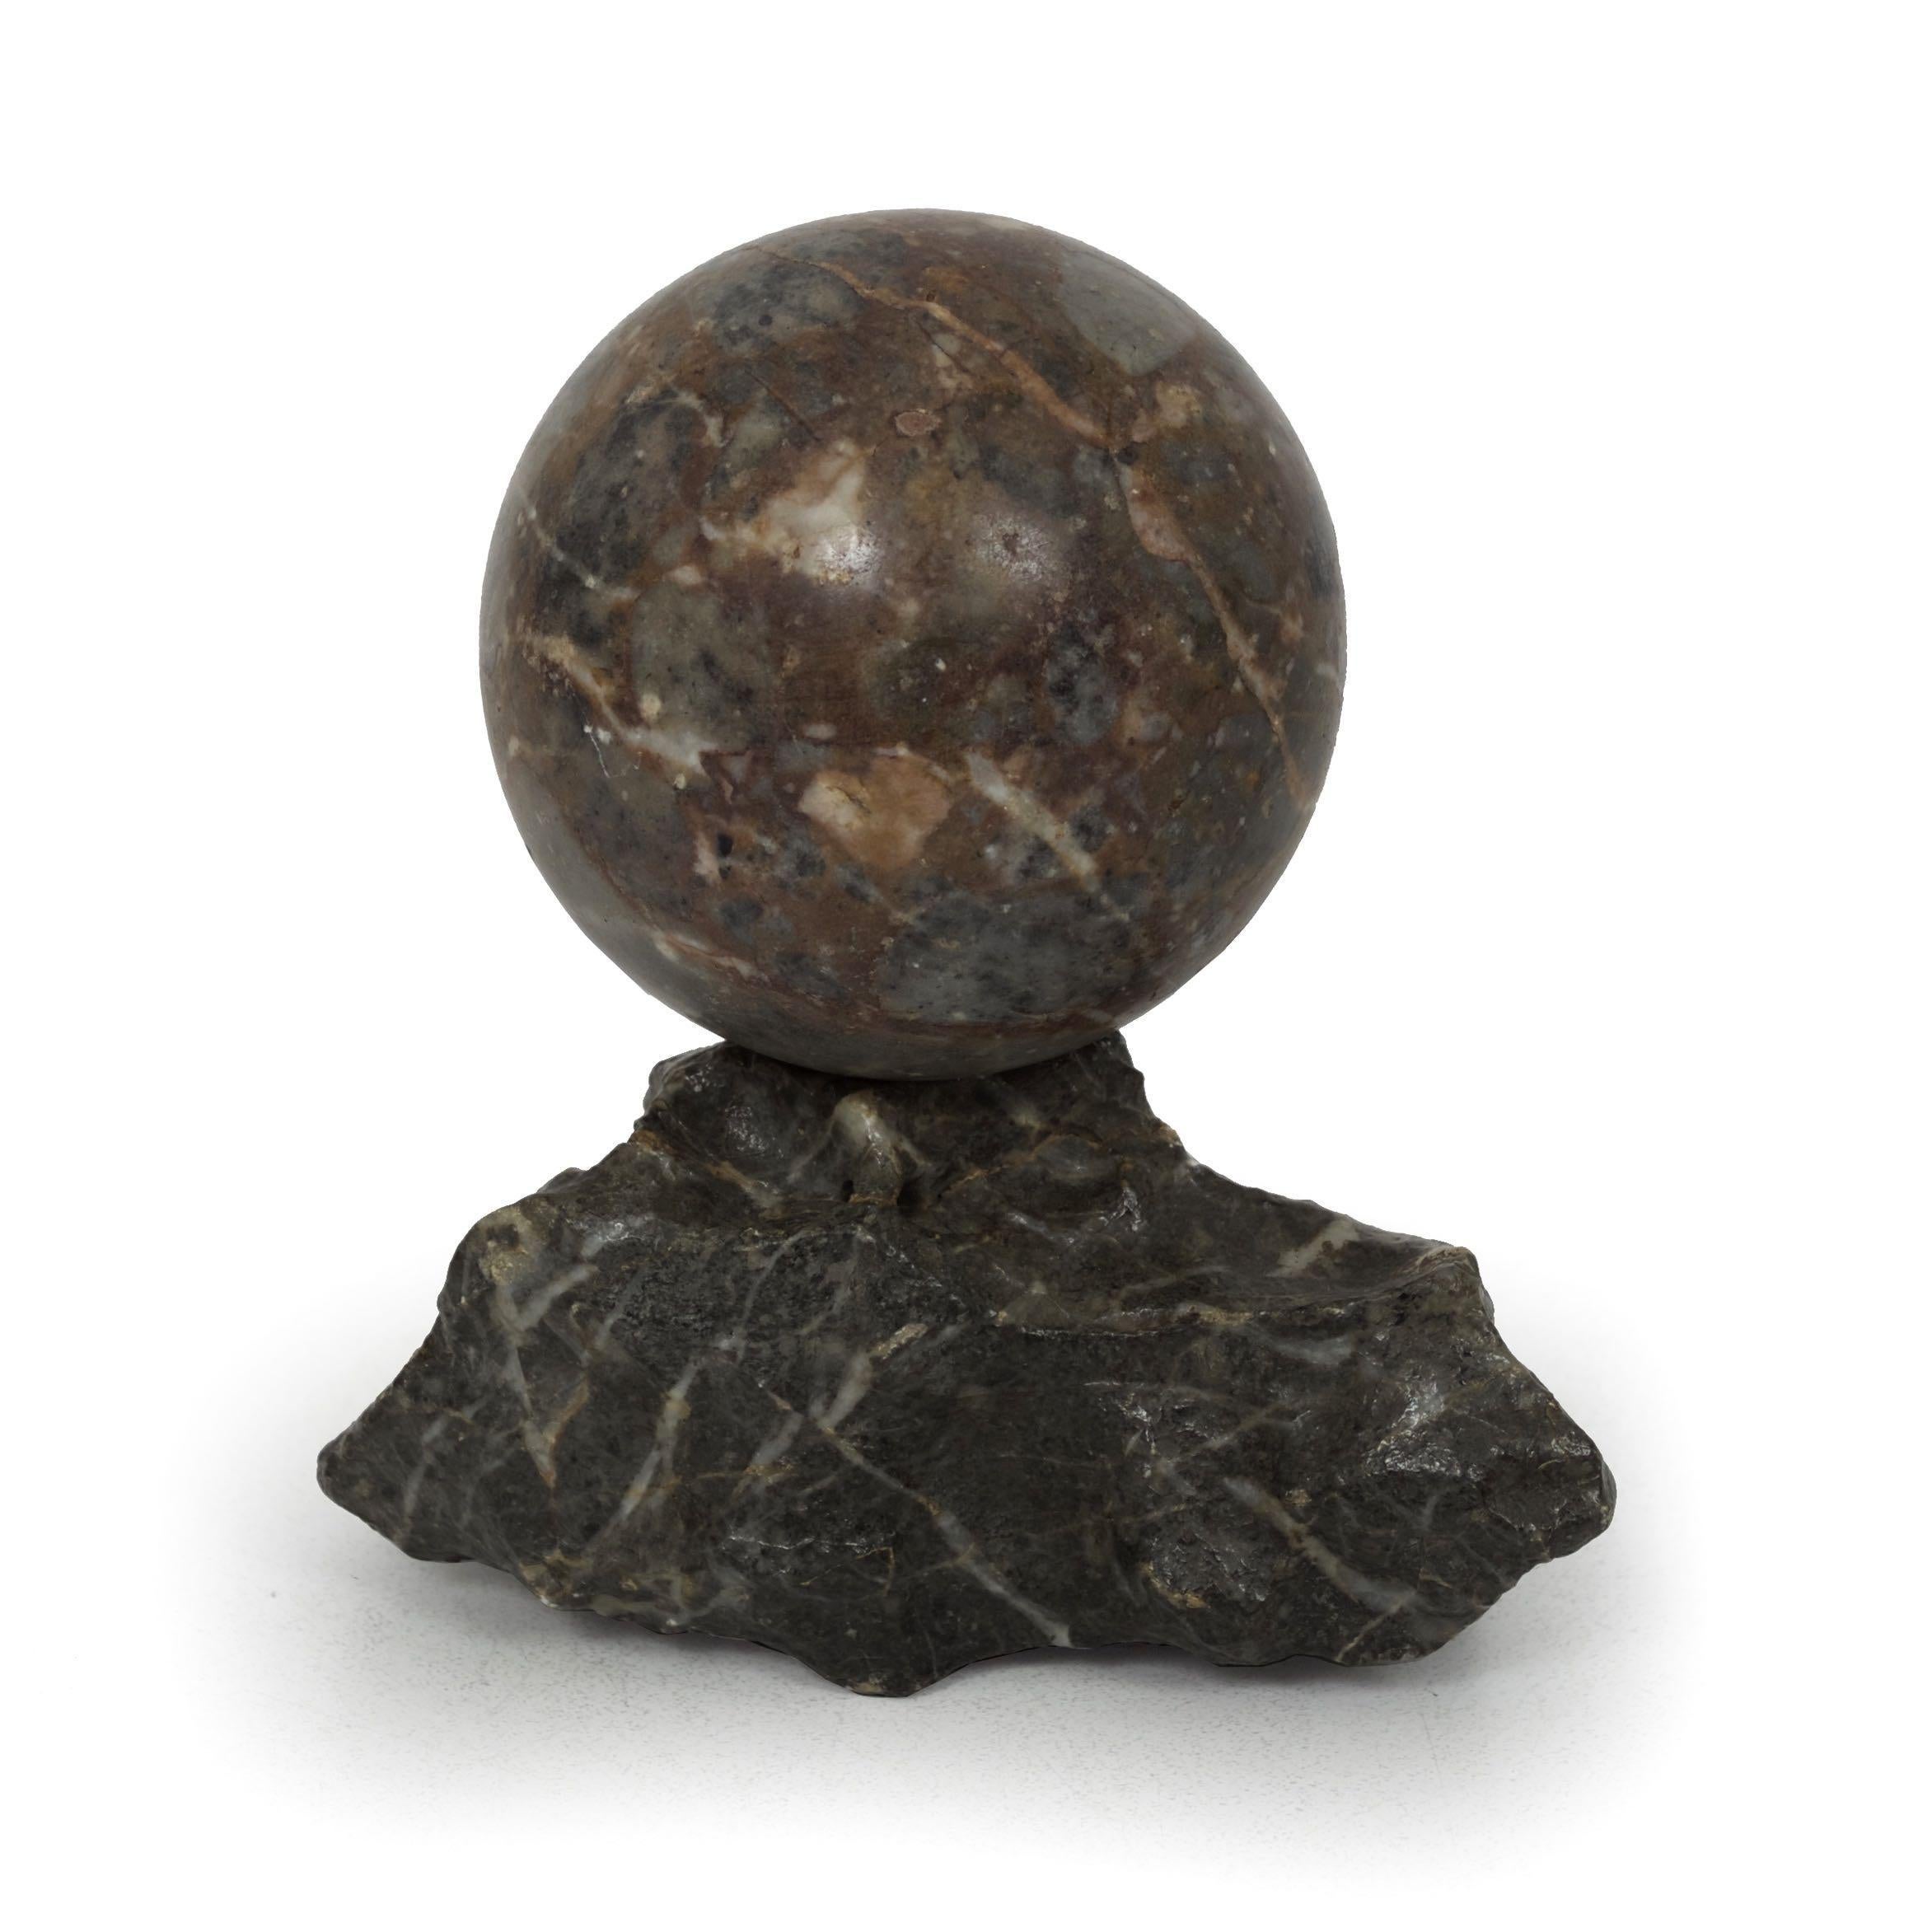 PAIR OF GRAND TOUR POLISHED MARMO AFRICANO MARBLE SPHERES
Circa early 19th century over shaped rock plinth
Item # C104033 

A gorgeous pair of 19th century decorative marmo marble spheres on shaped rock bases, they were likely intended both to